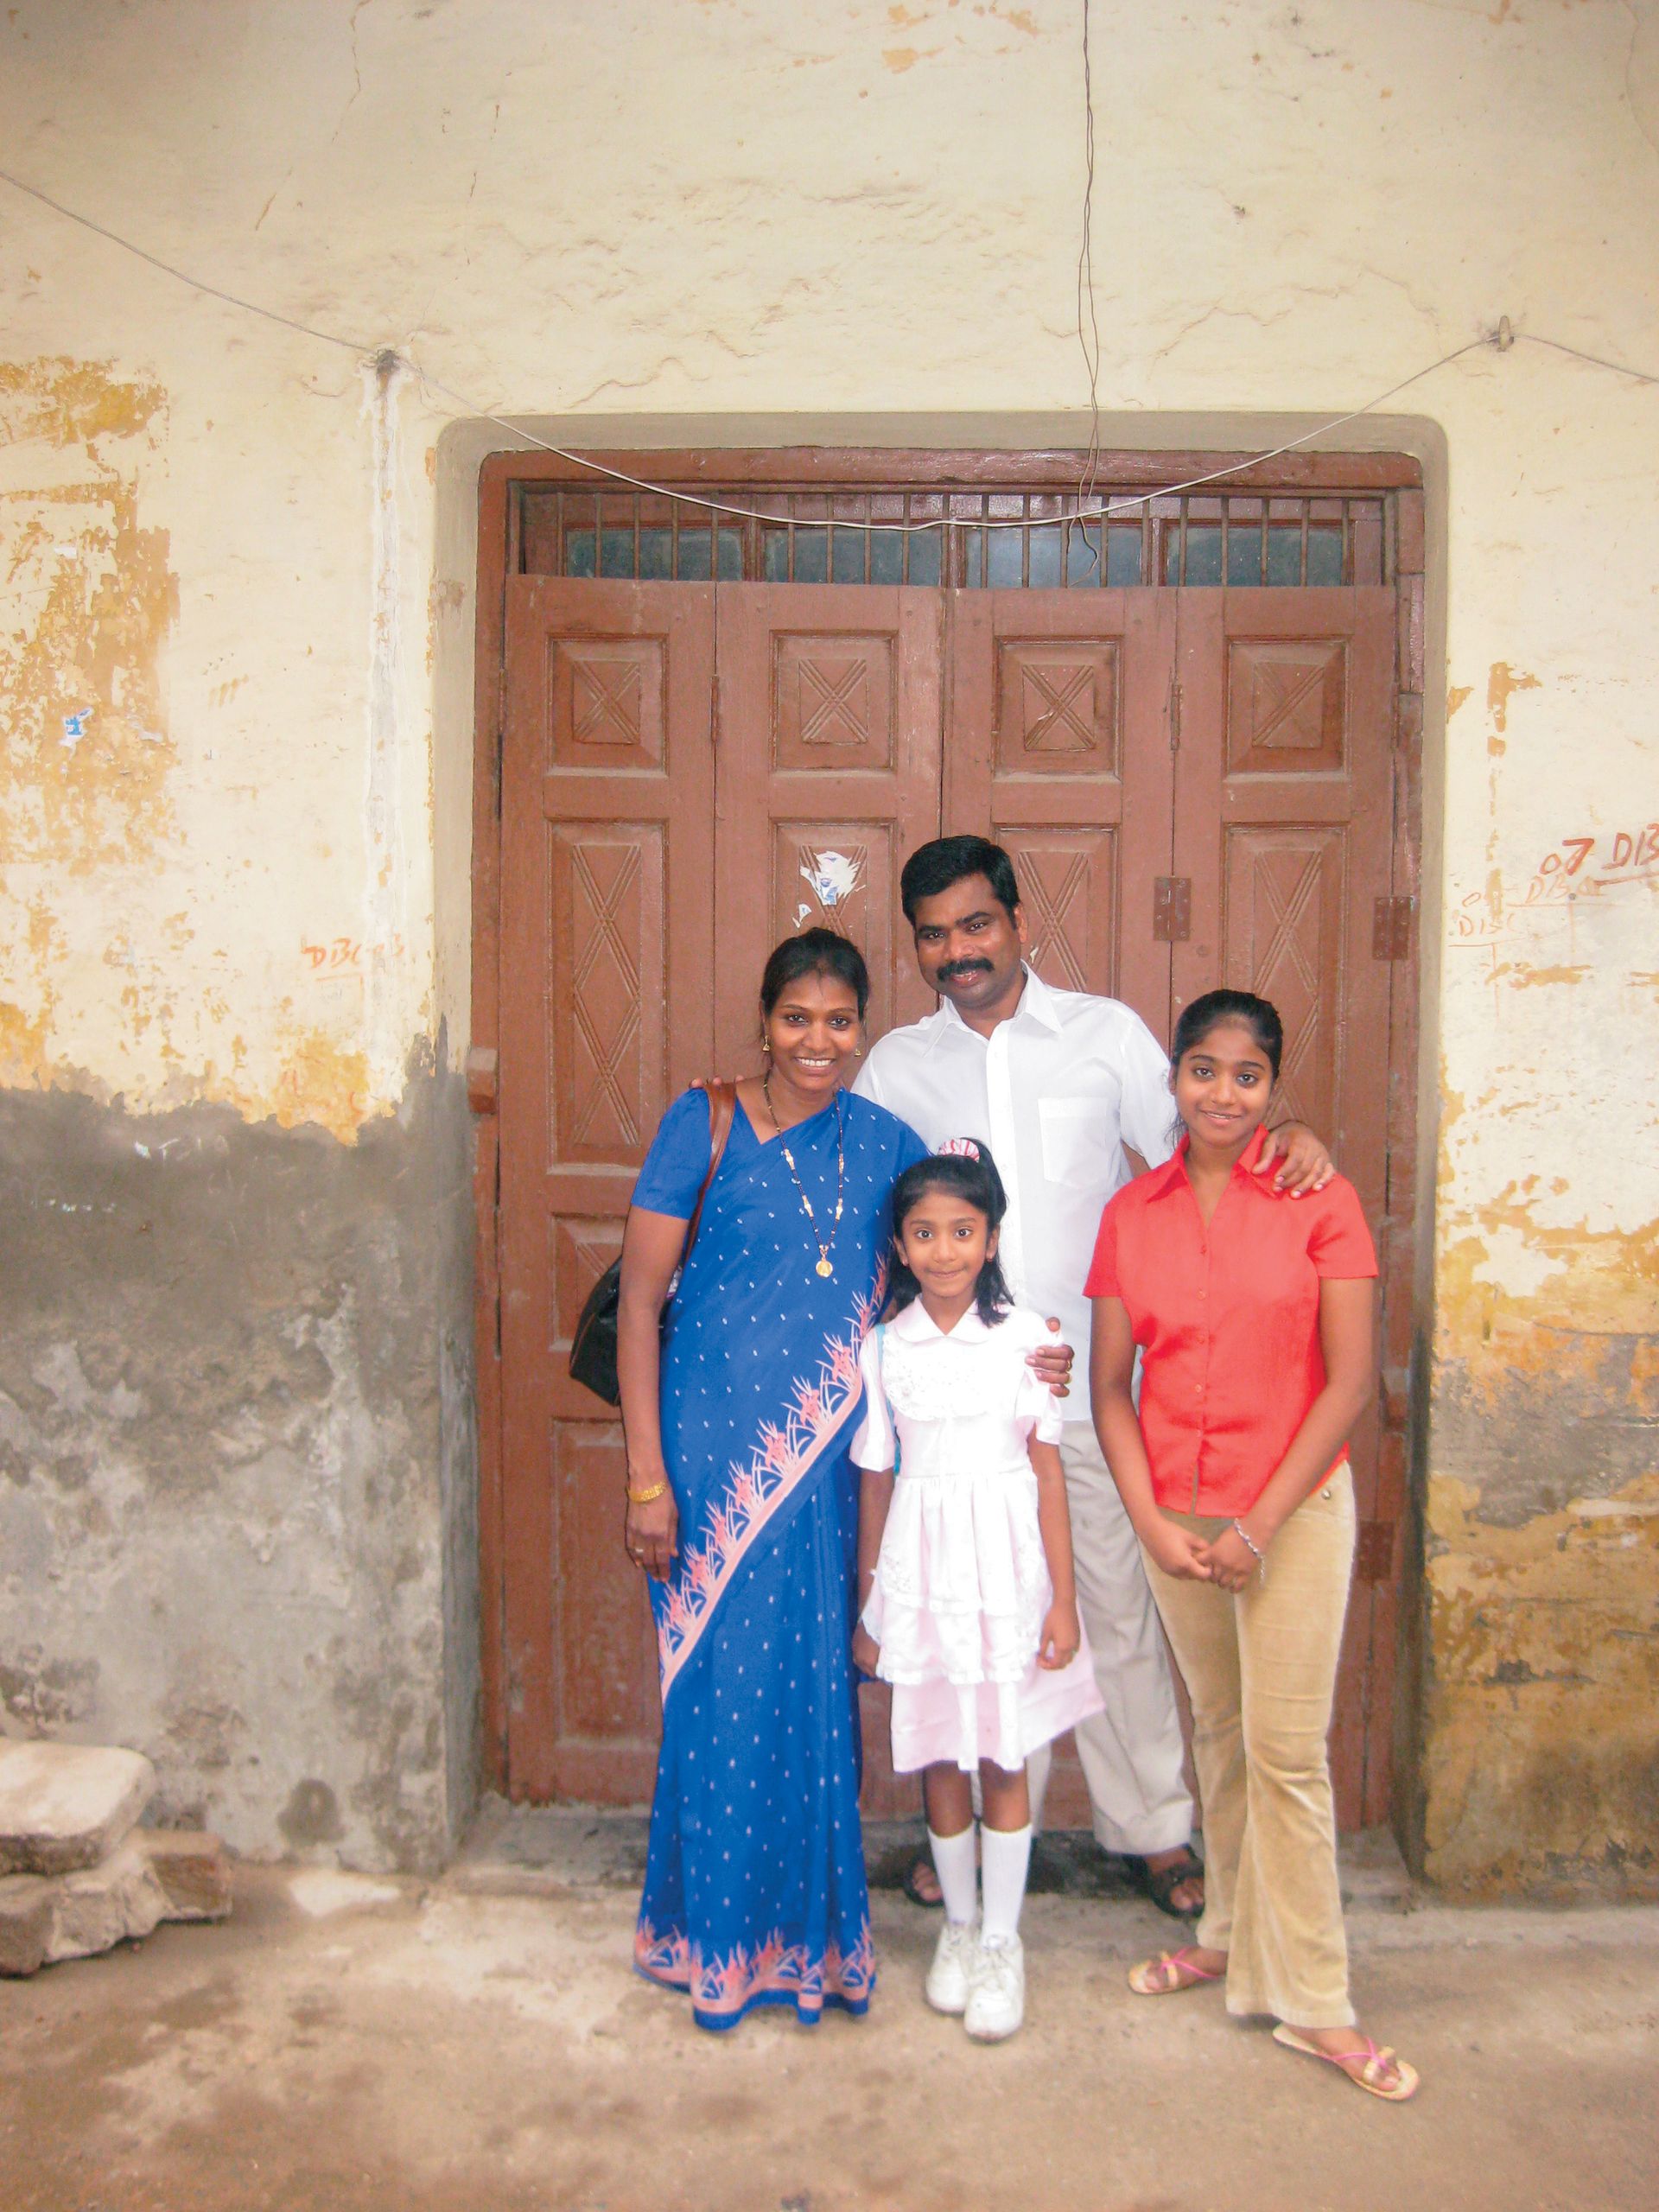 A portrait of a family in New Delhi standing together outside.